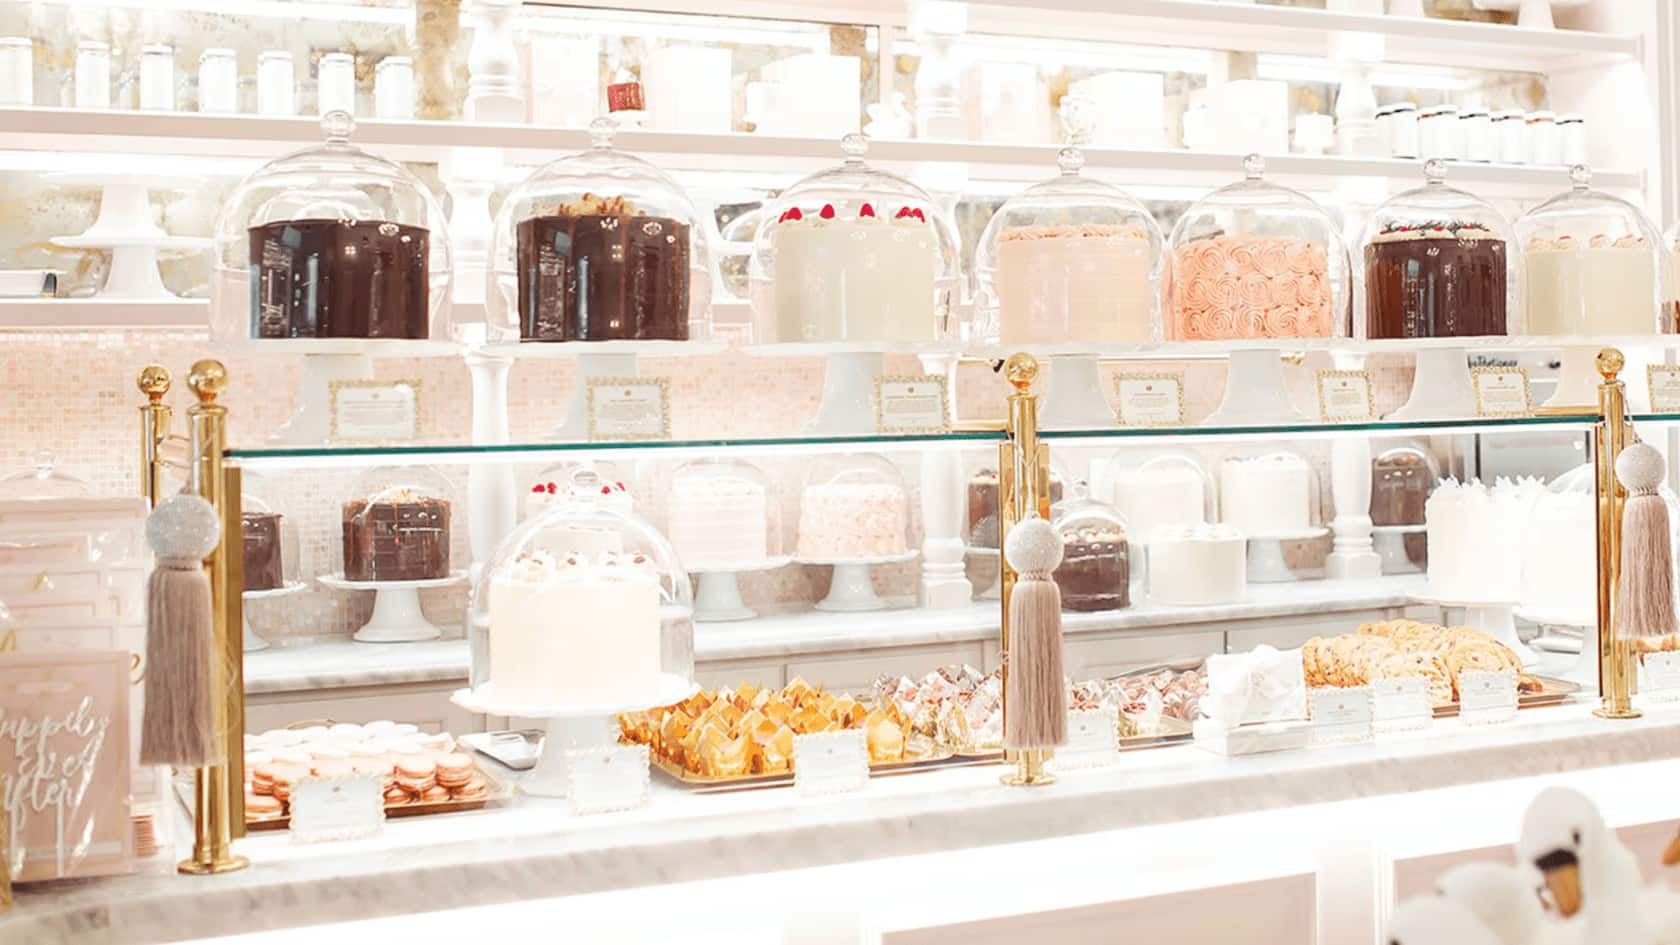 The Cake Bake Shop Bakery by Gwendolyn Rogers at Disney’s Boardwalk Opening Early Next Year